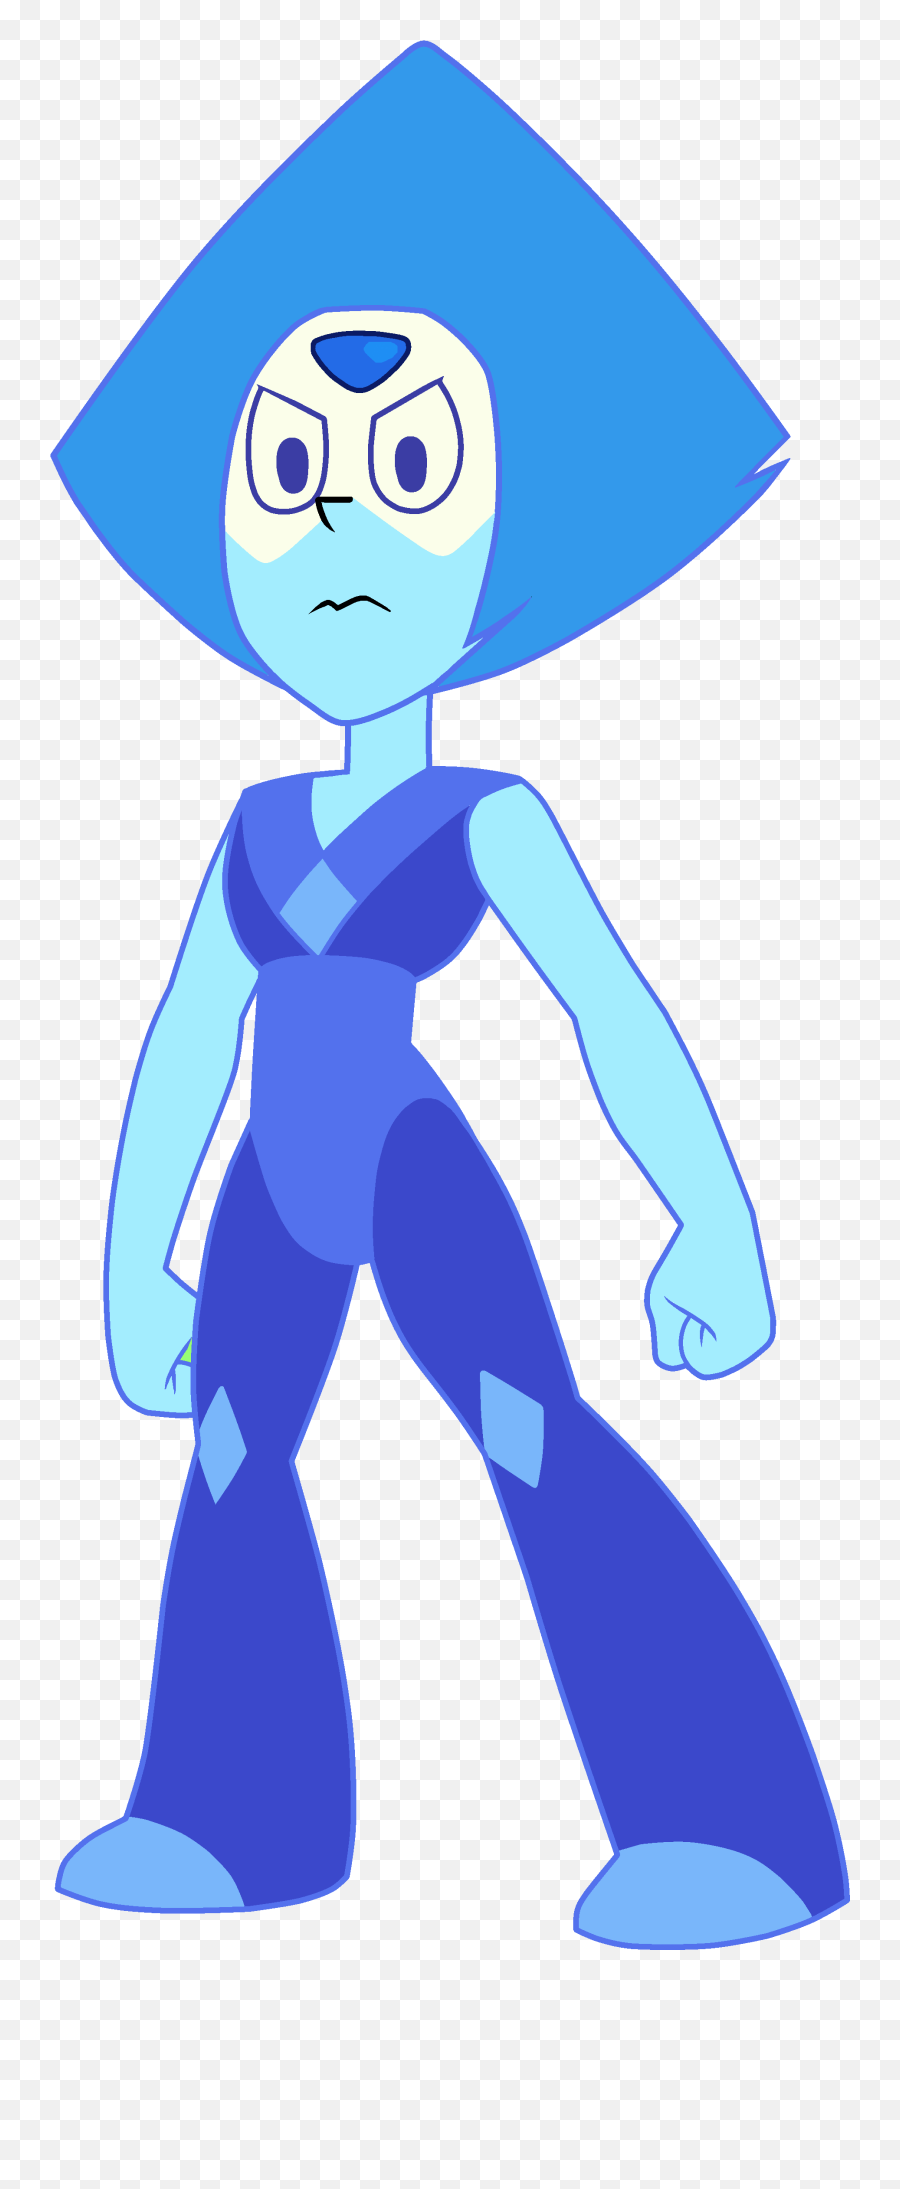 Peridot Wikia Steven Universe Ting Vit Fandom - Shimmer And Shine Steven Universe Emoji,If A Girl Uses 2 Triangles Pointing Up Emoticon